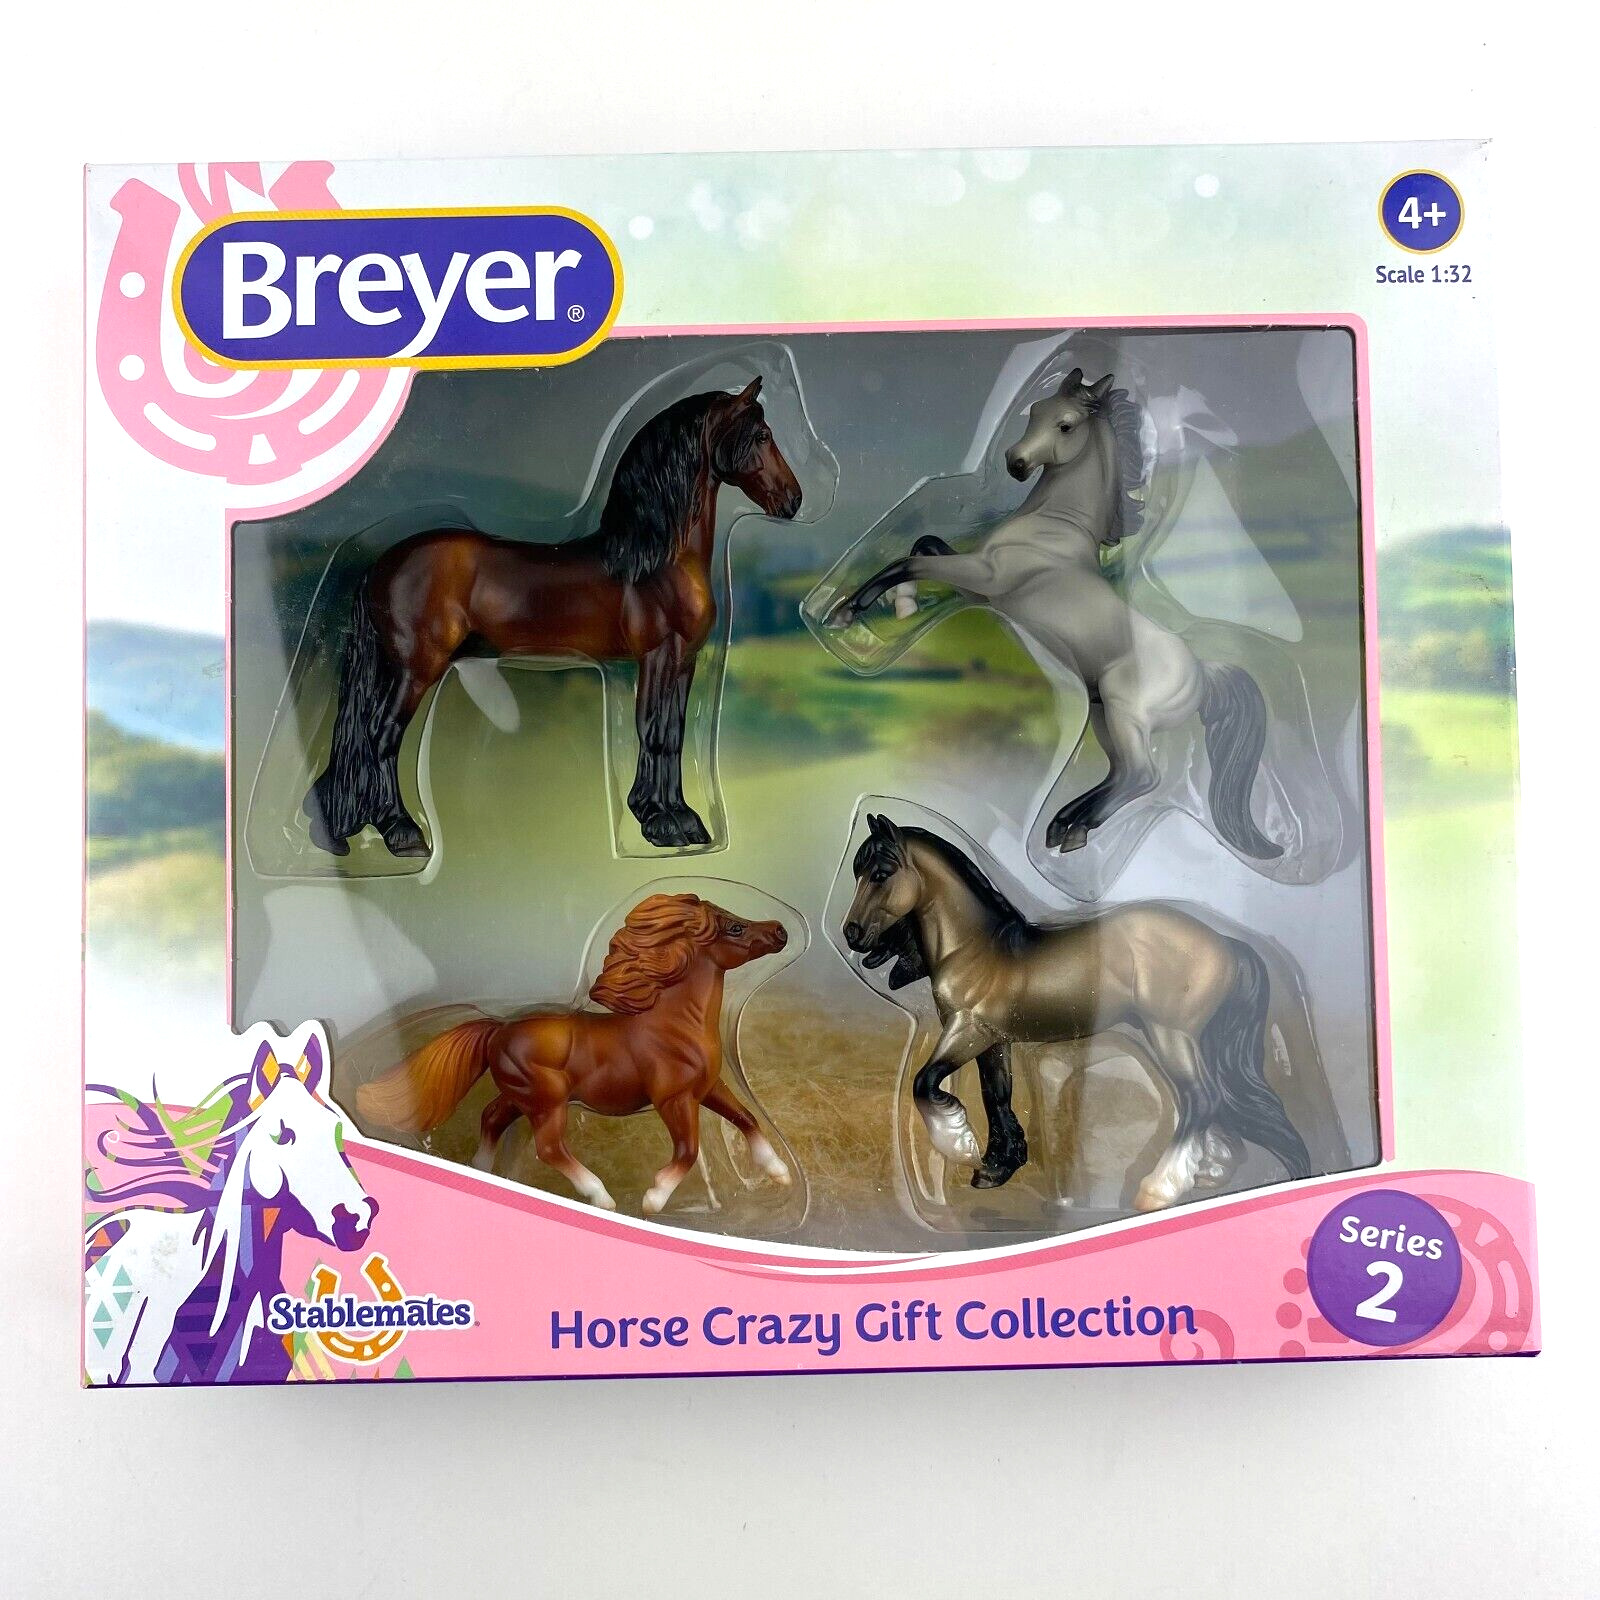 Breyer Stablemates Horse Crazy Gift Collection Four Horse Set Series 2 